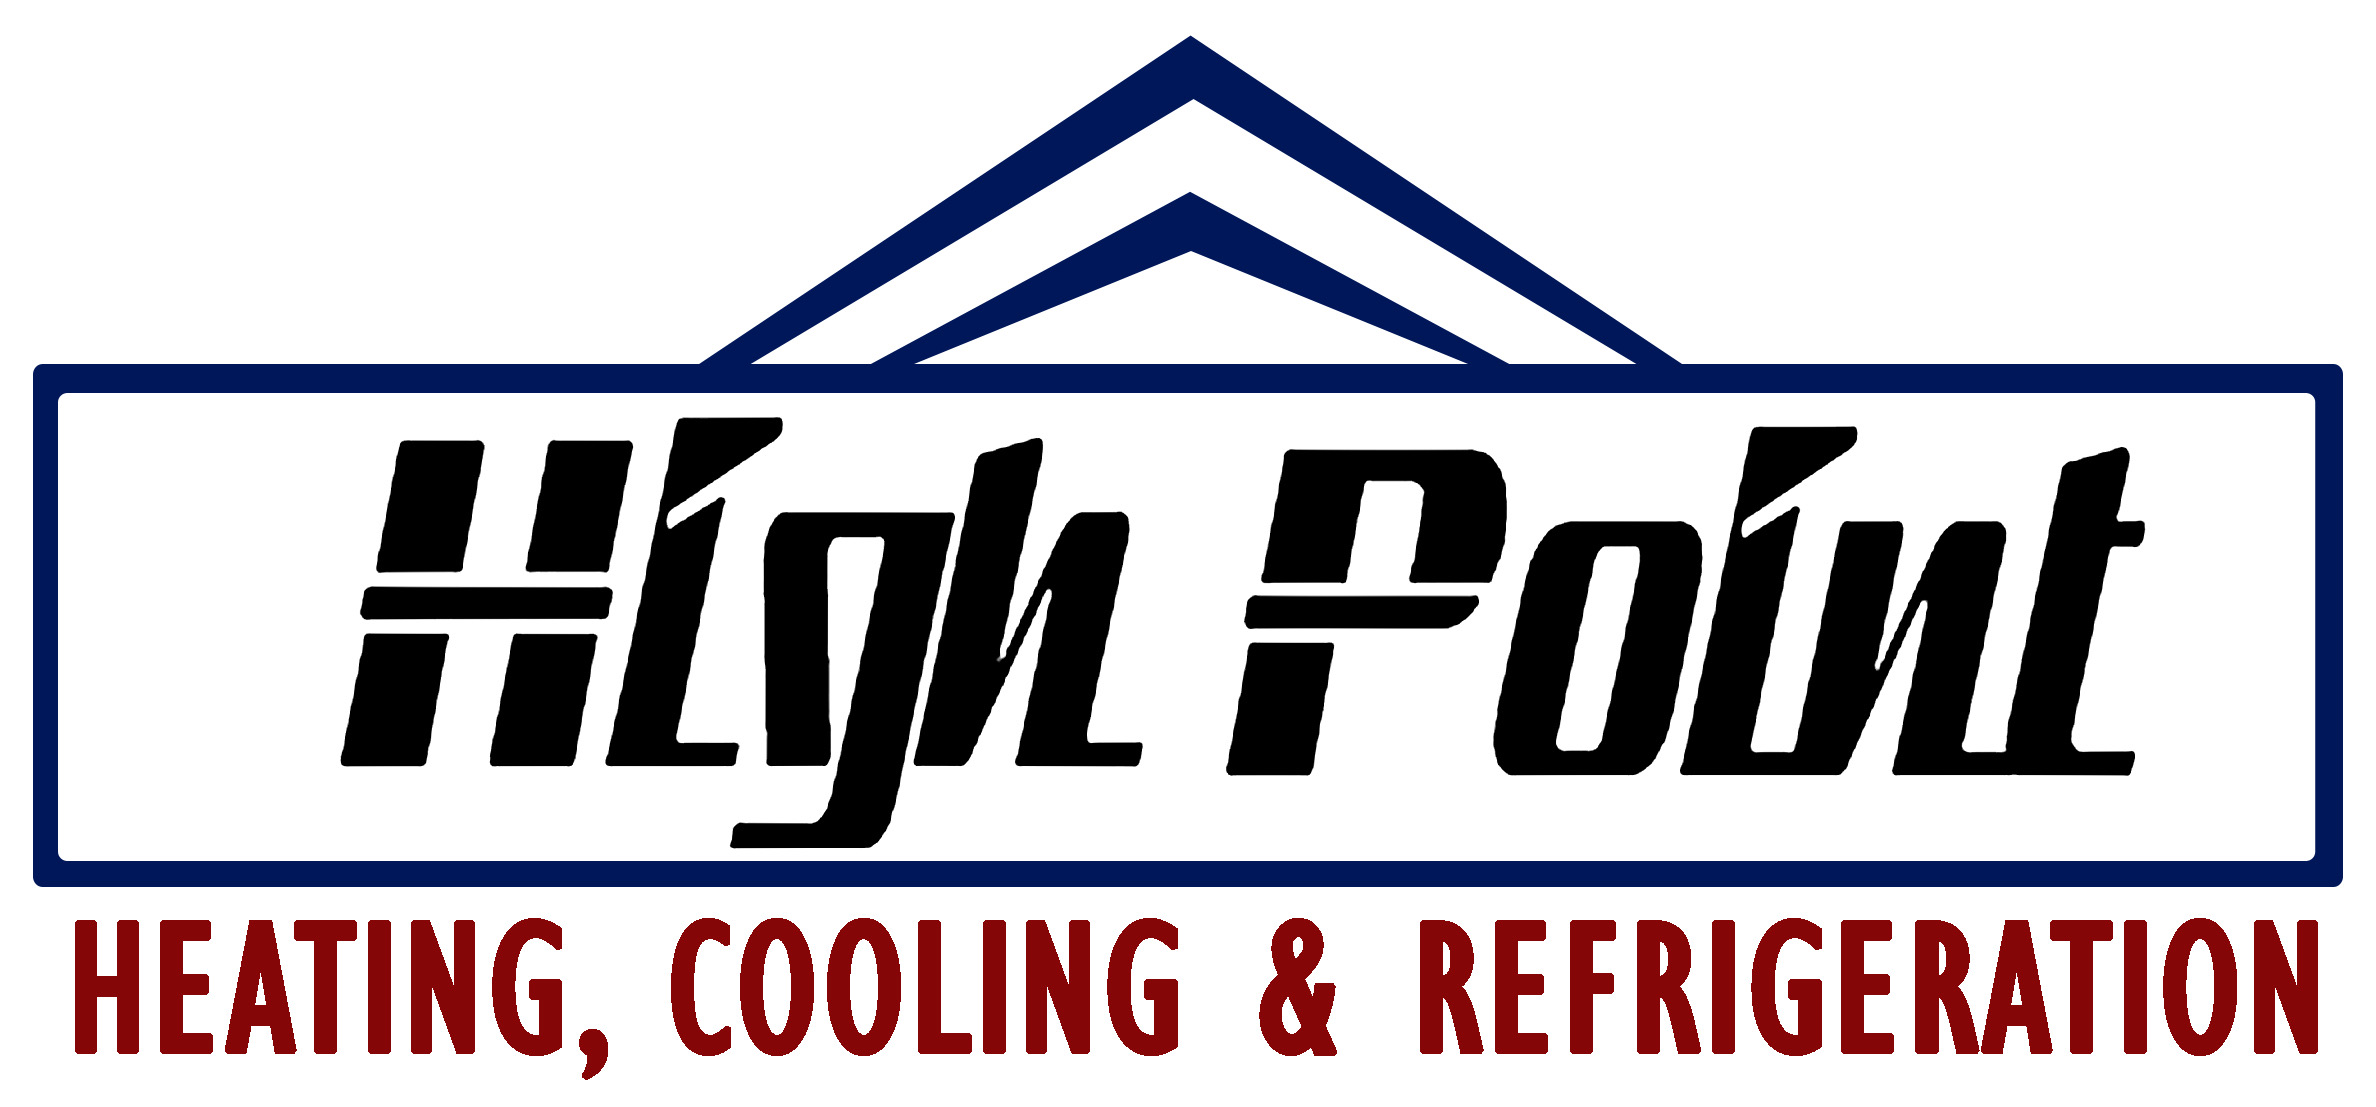 High Point Heating, Cooling & Refrigeration